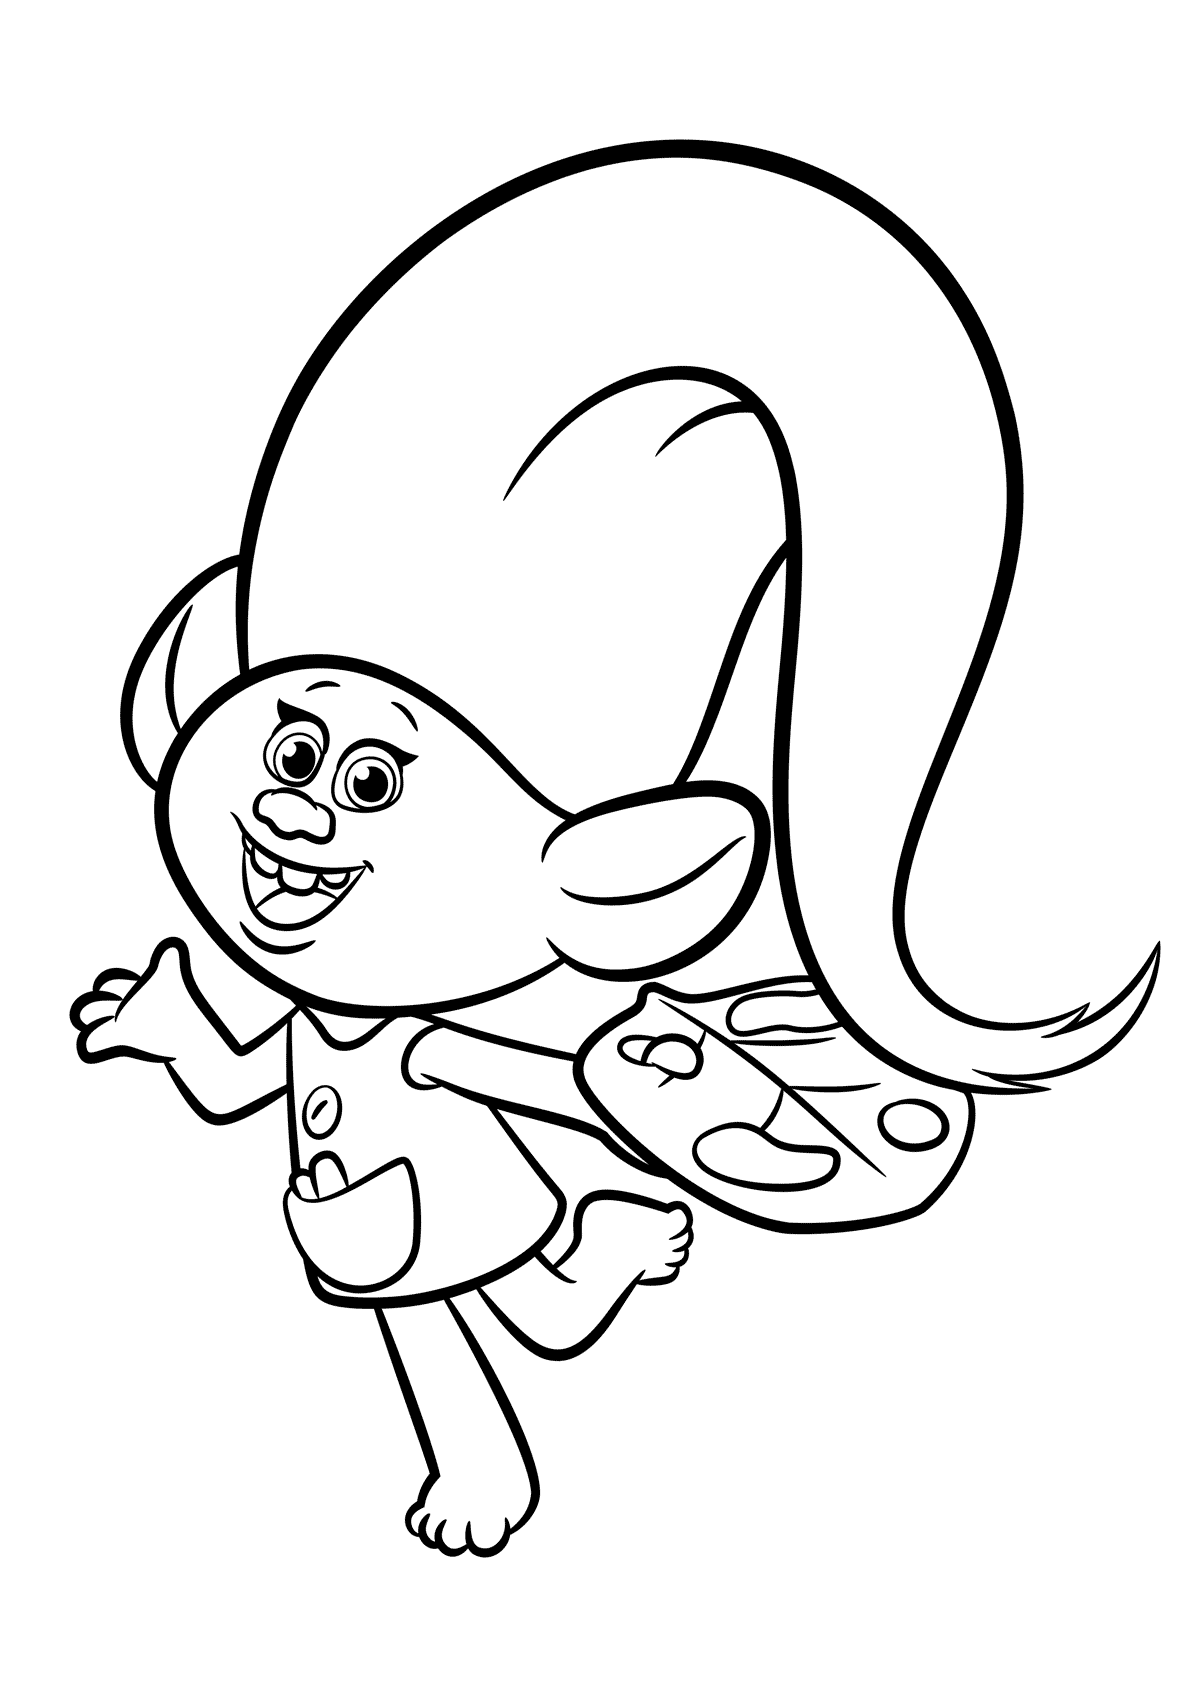 printable coloring pages trolls poppy from trolls coloring page free printable coloring pages trolls printable coloring 